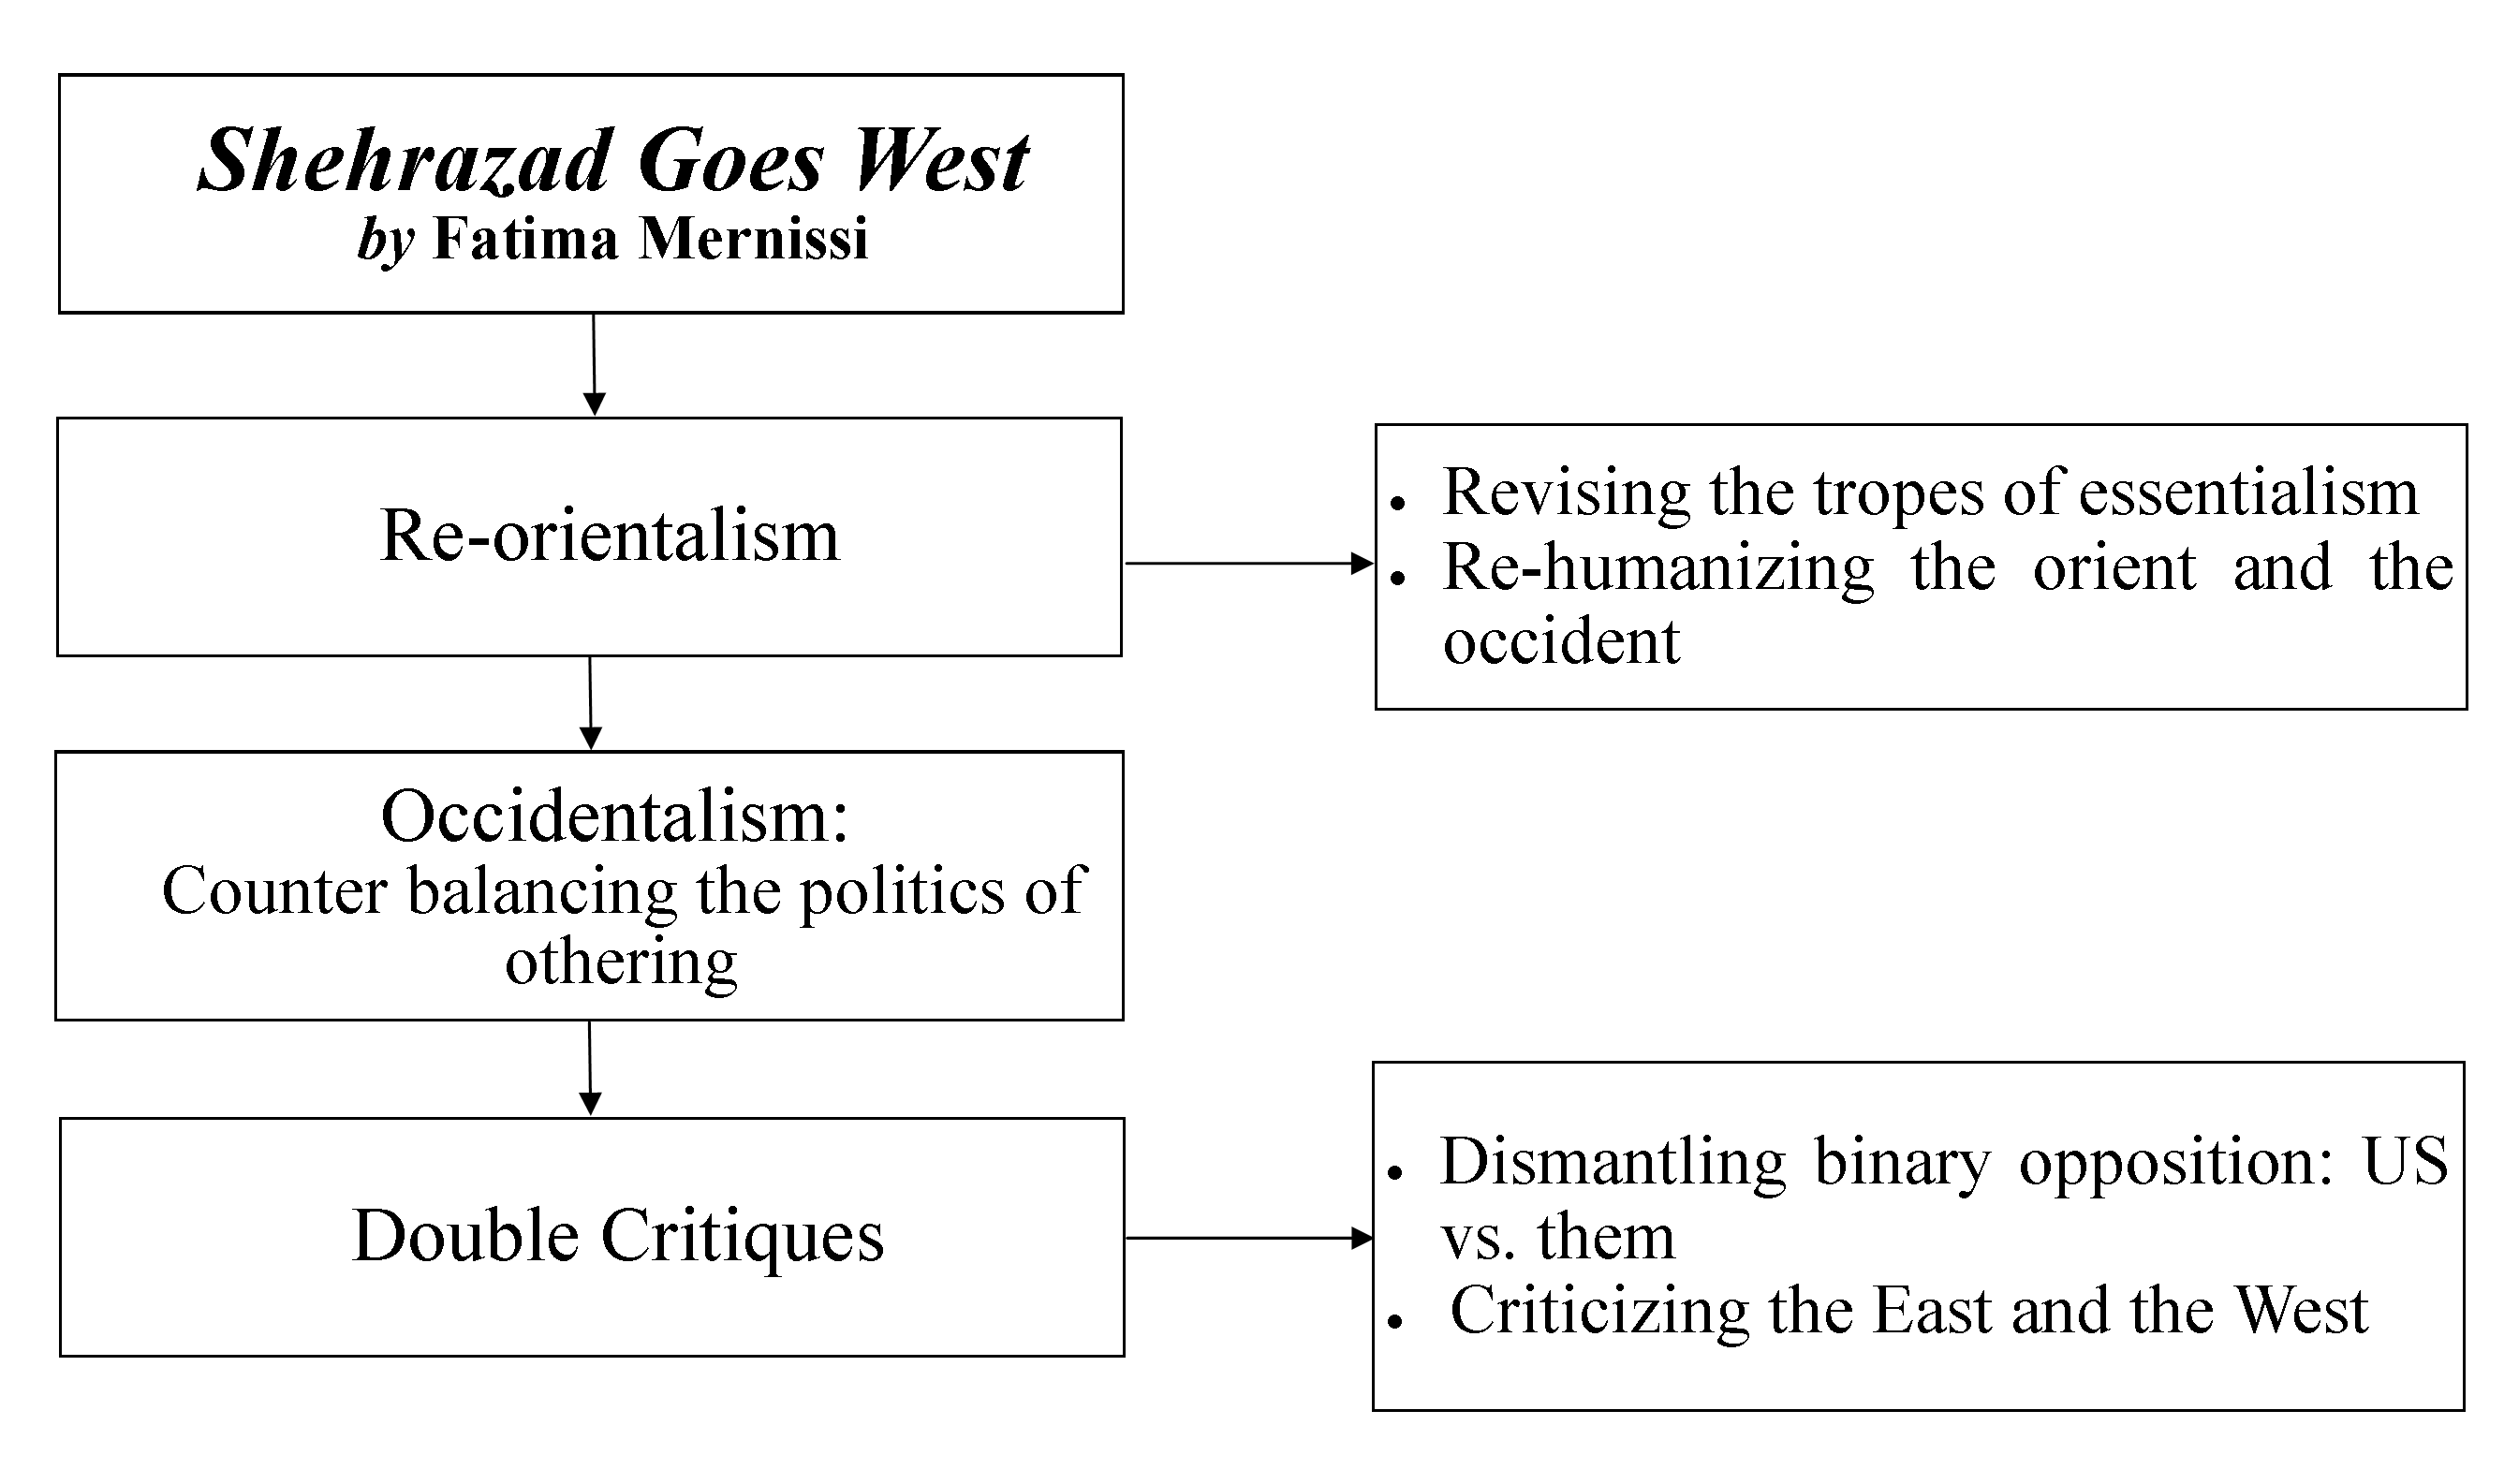 Feminist Occidentalist Discourse in ‘Shehrazad Goes West: Different Cultures, Different Harems’ by Fatima Mernissi